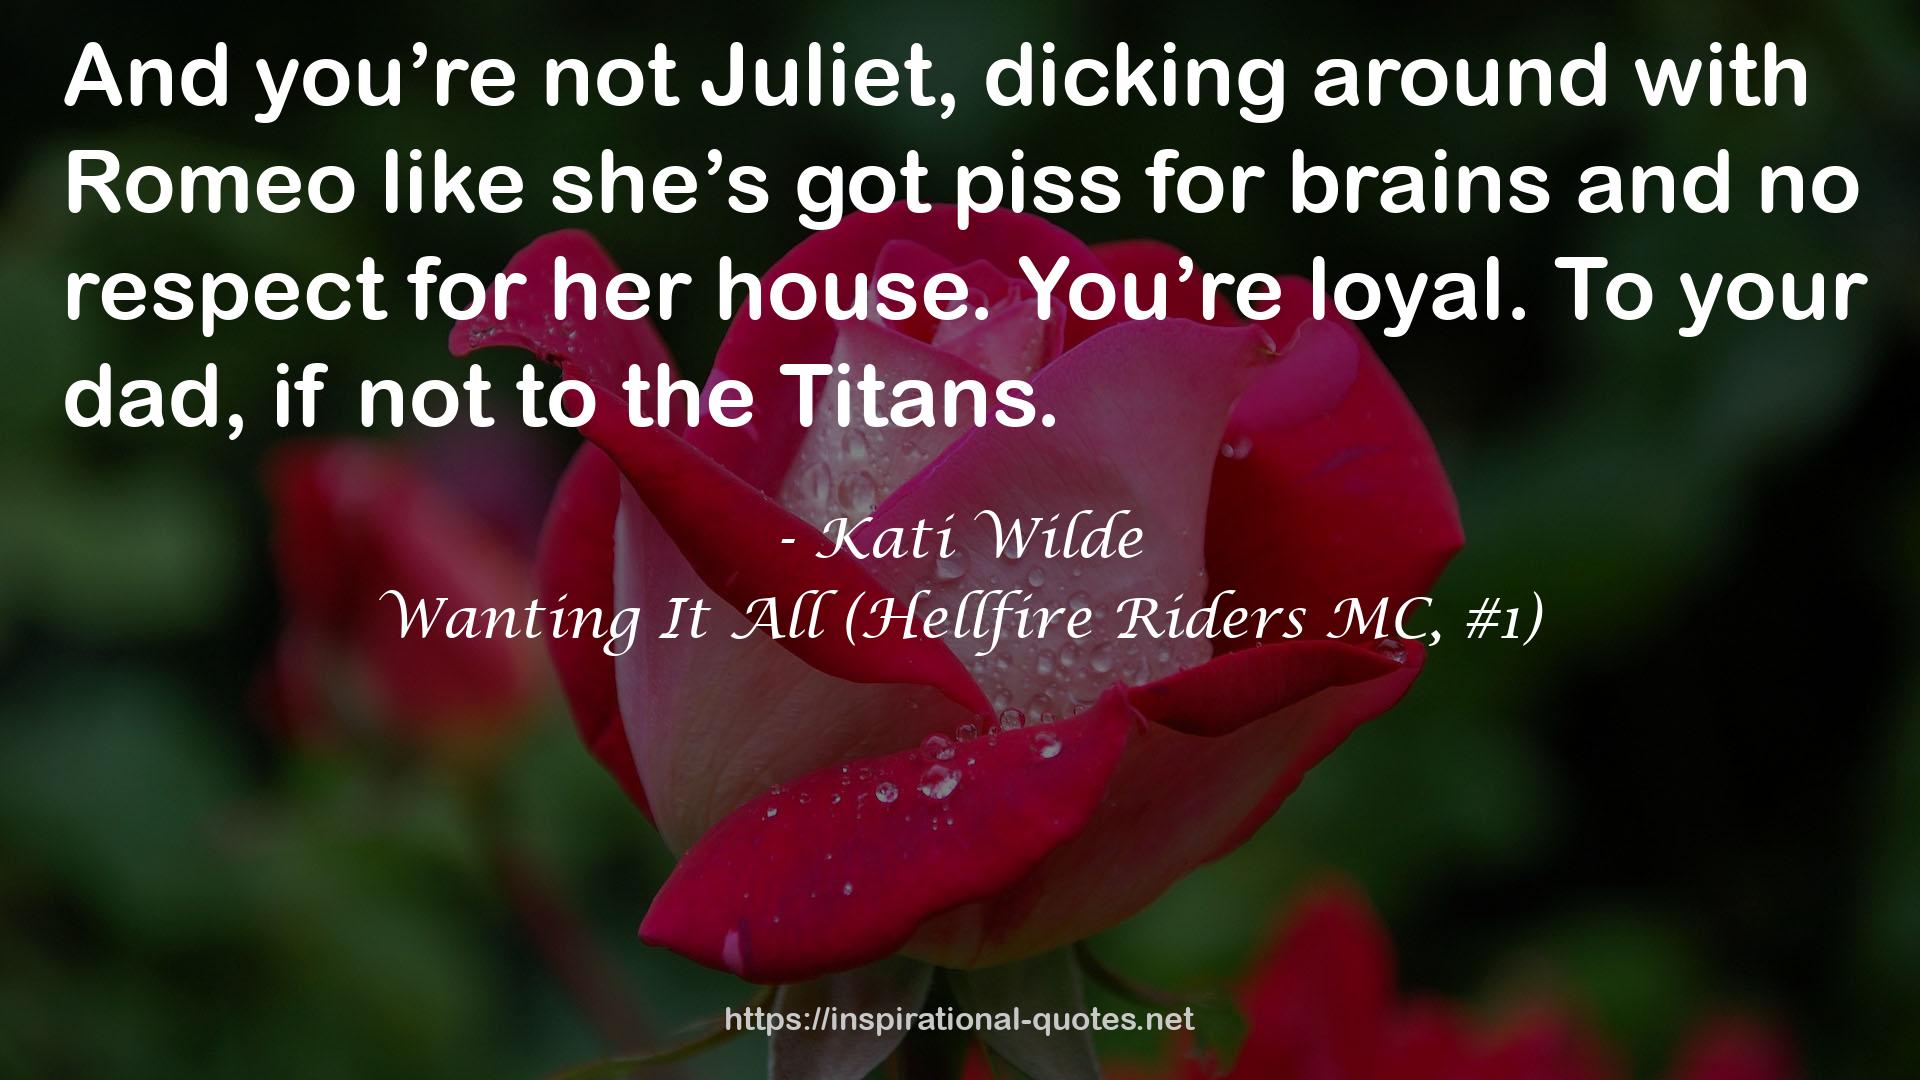 Wanting It All (Hellfire Riders MC, #1) QUOTES